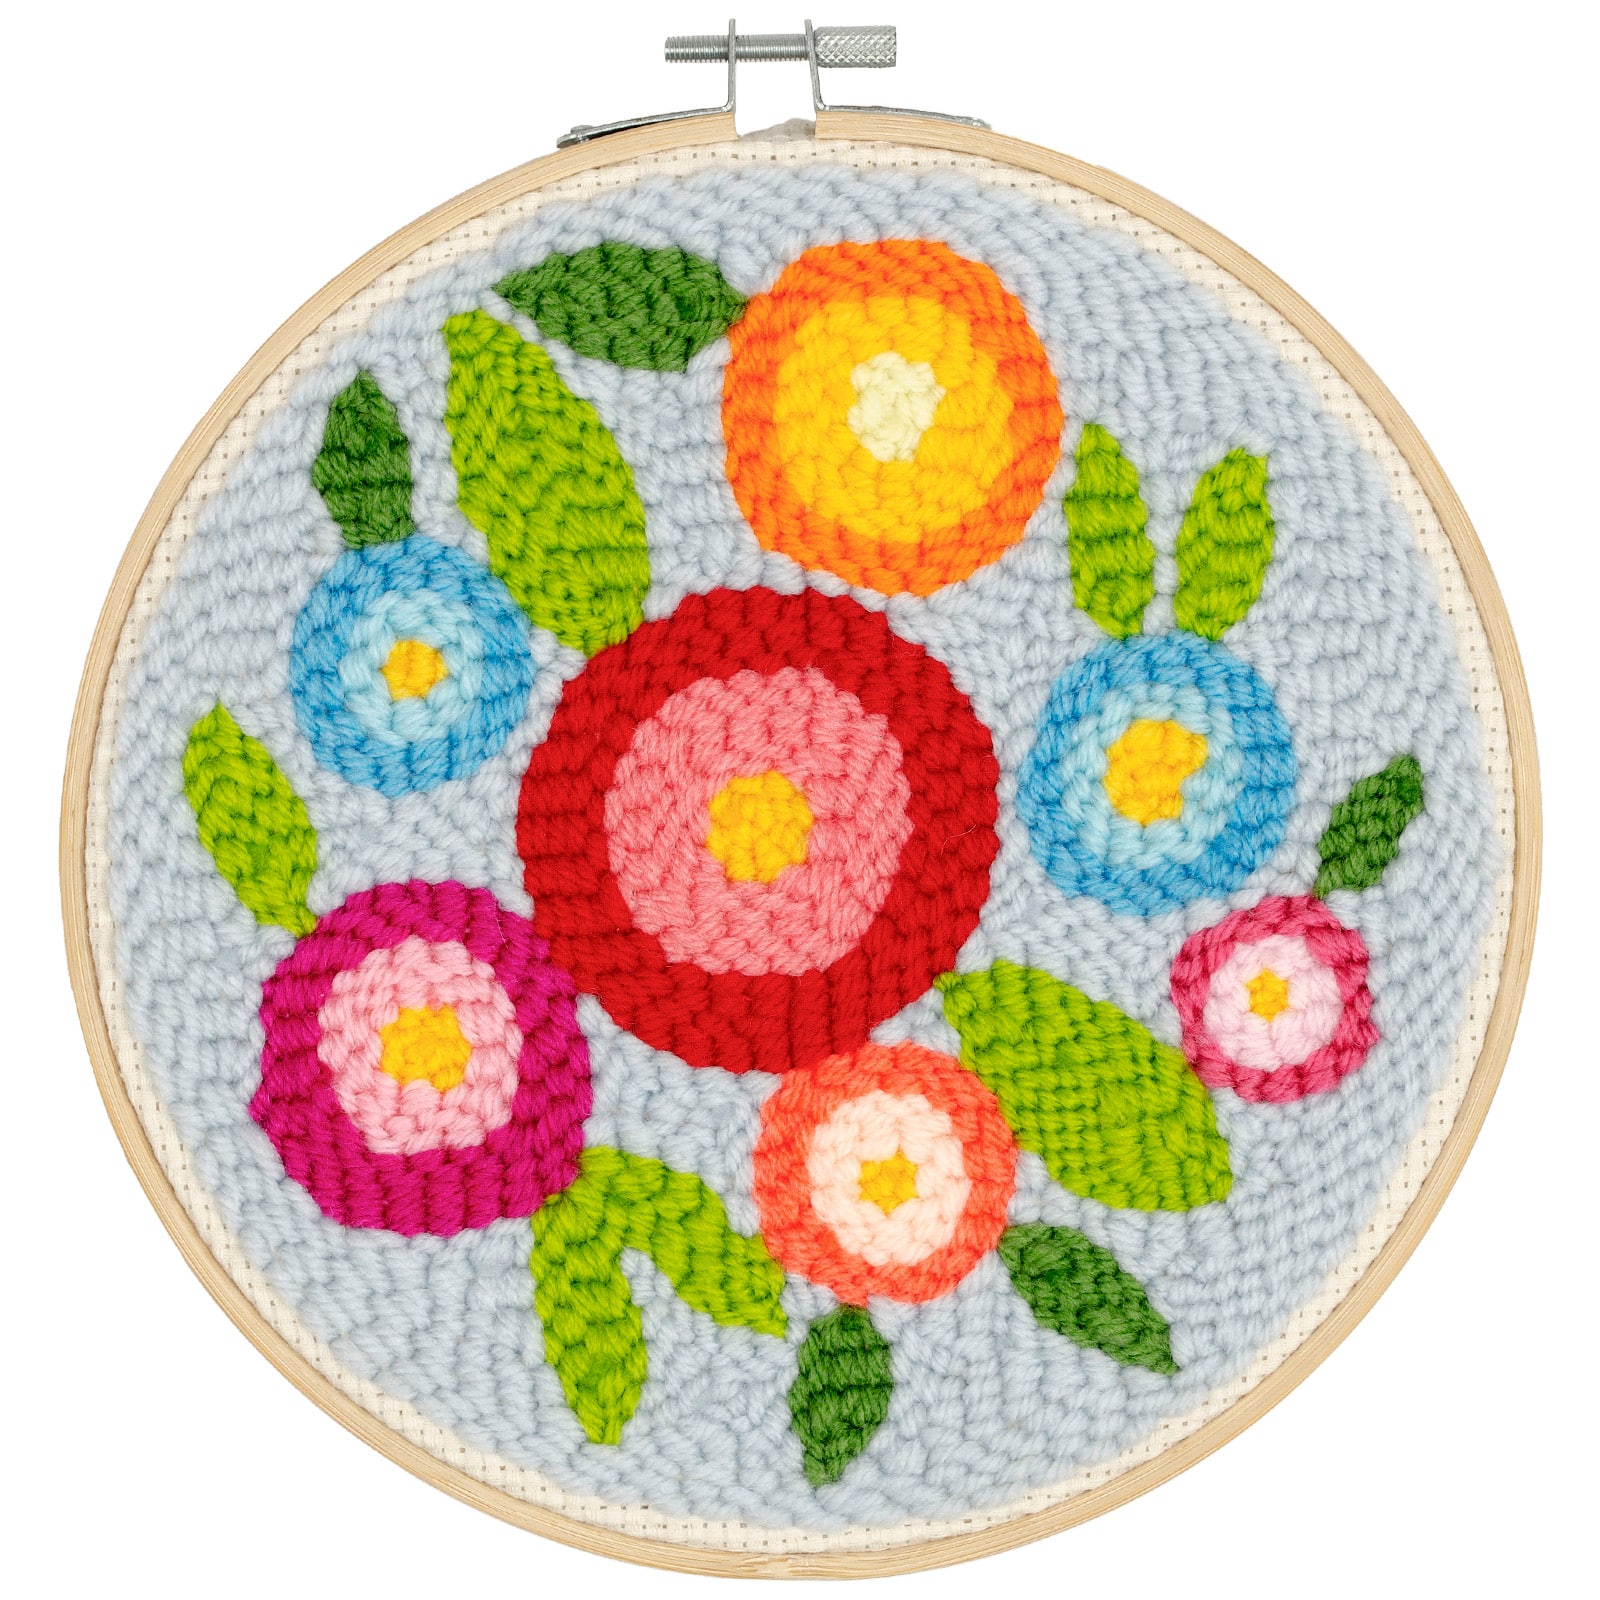 Online] Punch Needle Class – Assembly: gather + create